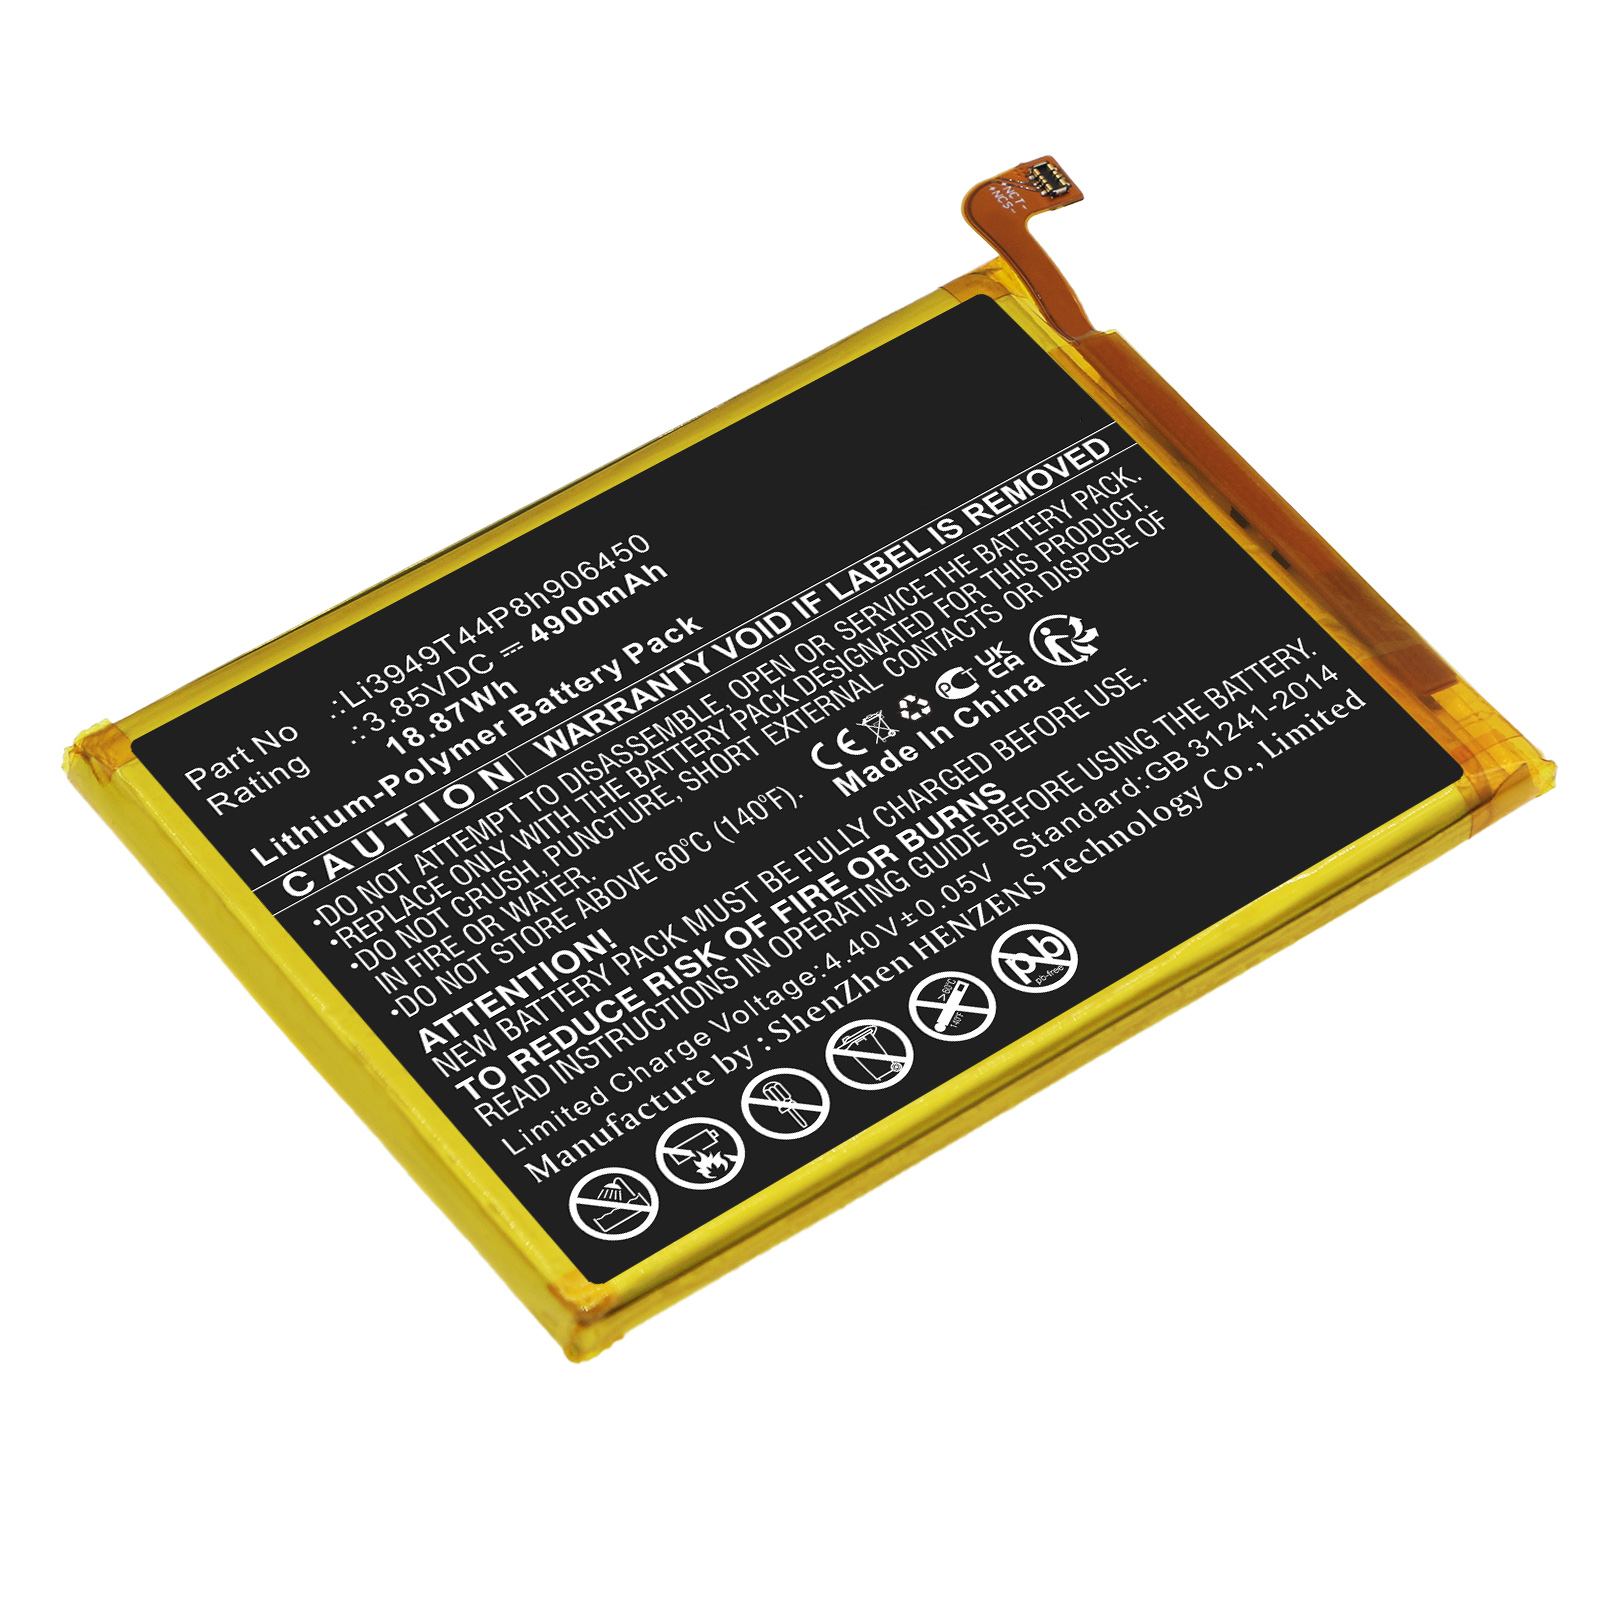 Synergy Digital Cell Phone Battery, Compatible with ZTE Li3949T44P8h906450 Cell Phone Battery (Li-Pol, 3.85V, 4900mAh)